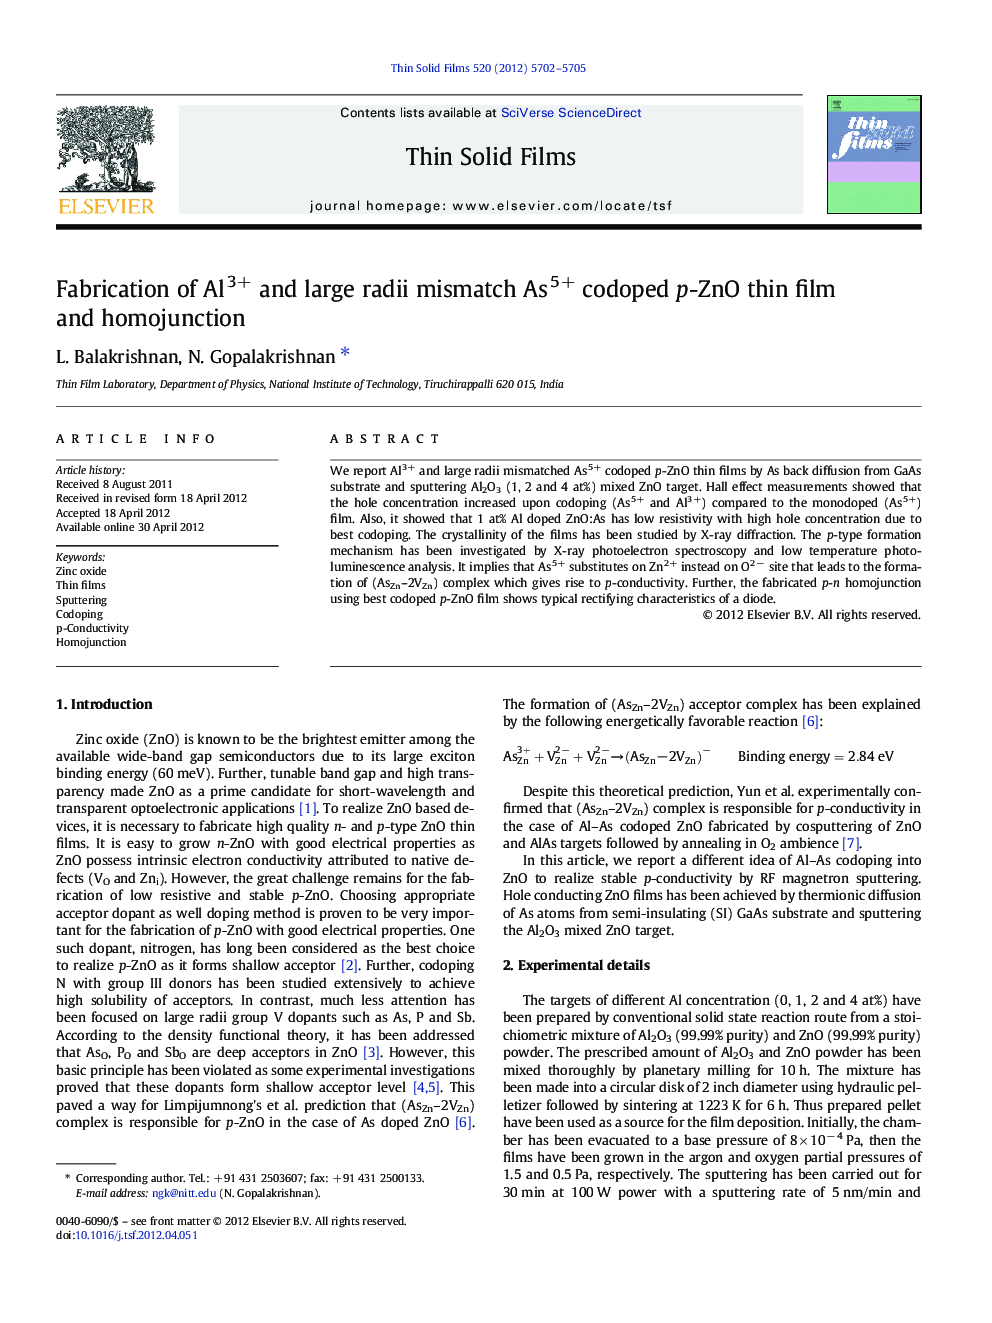 Fabrication of Al3+ and large radii mismatch As5+ codoped p-ZnO thin film and homojunction